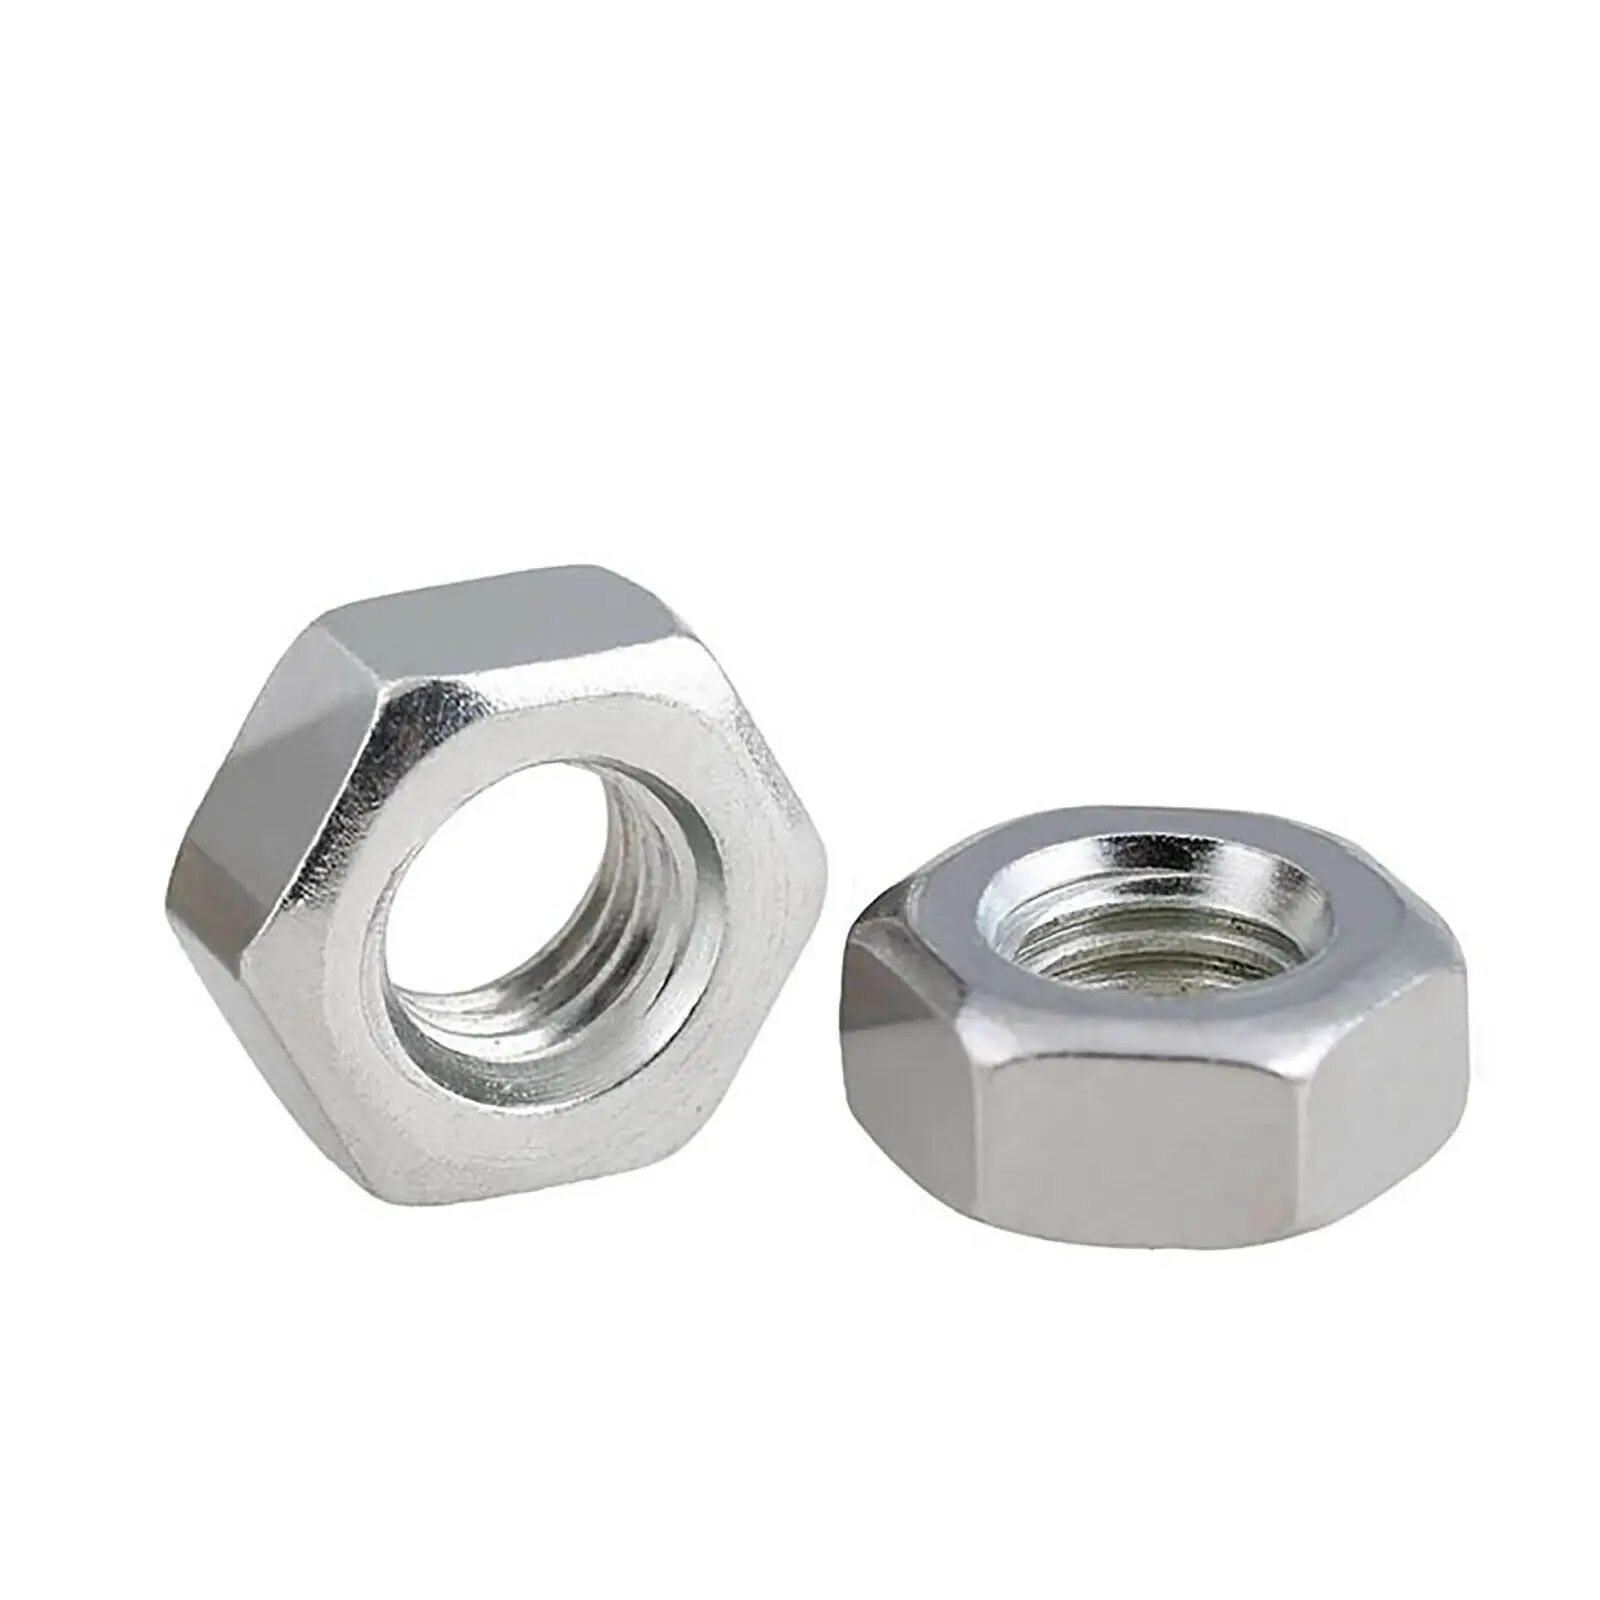 1/8" 5/32" 3/16" 1/2" BSW Hexagon Full Nuts DIN 934 Lock Nuts A2 Stainless Steel 